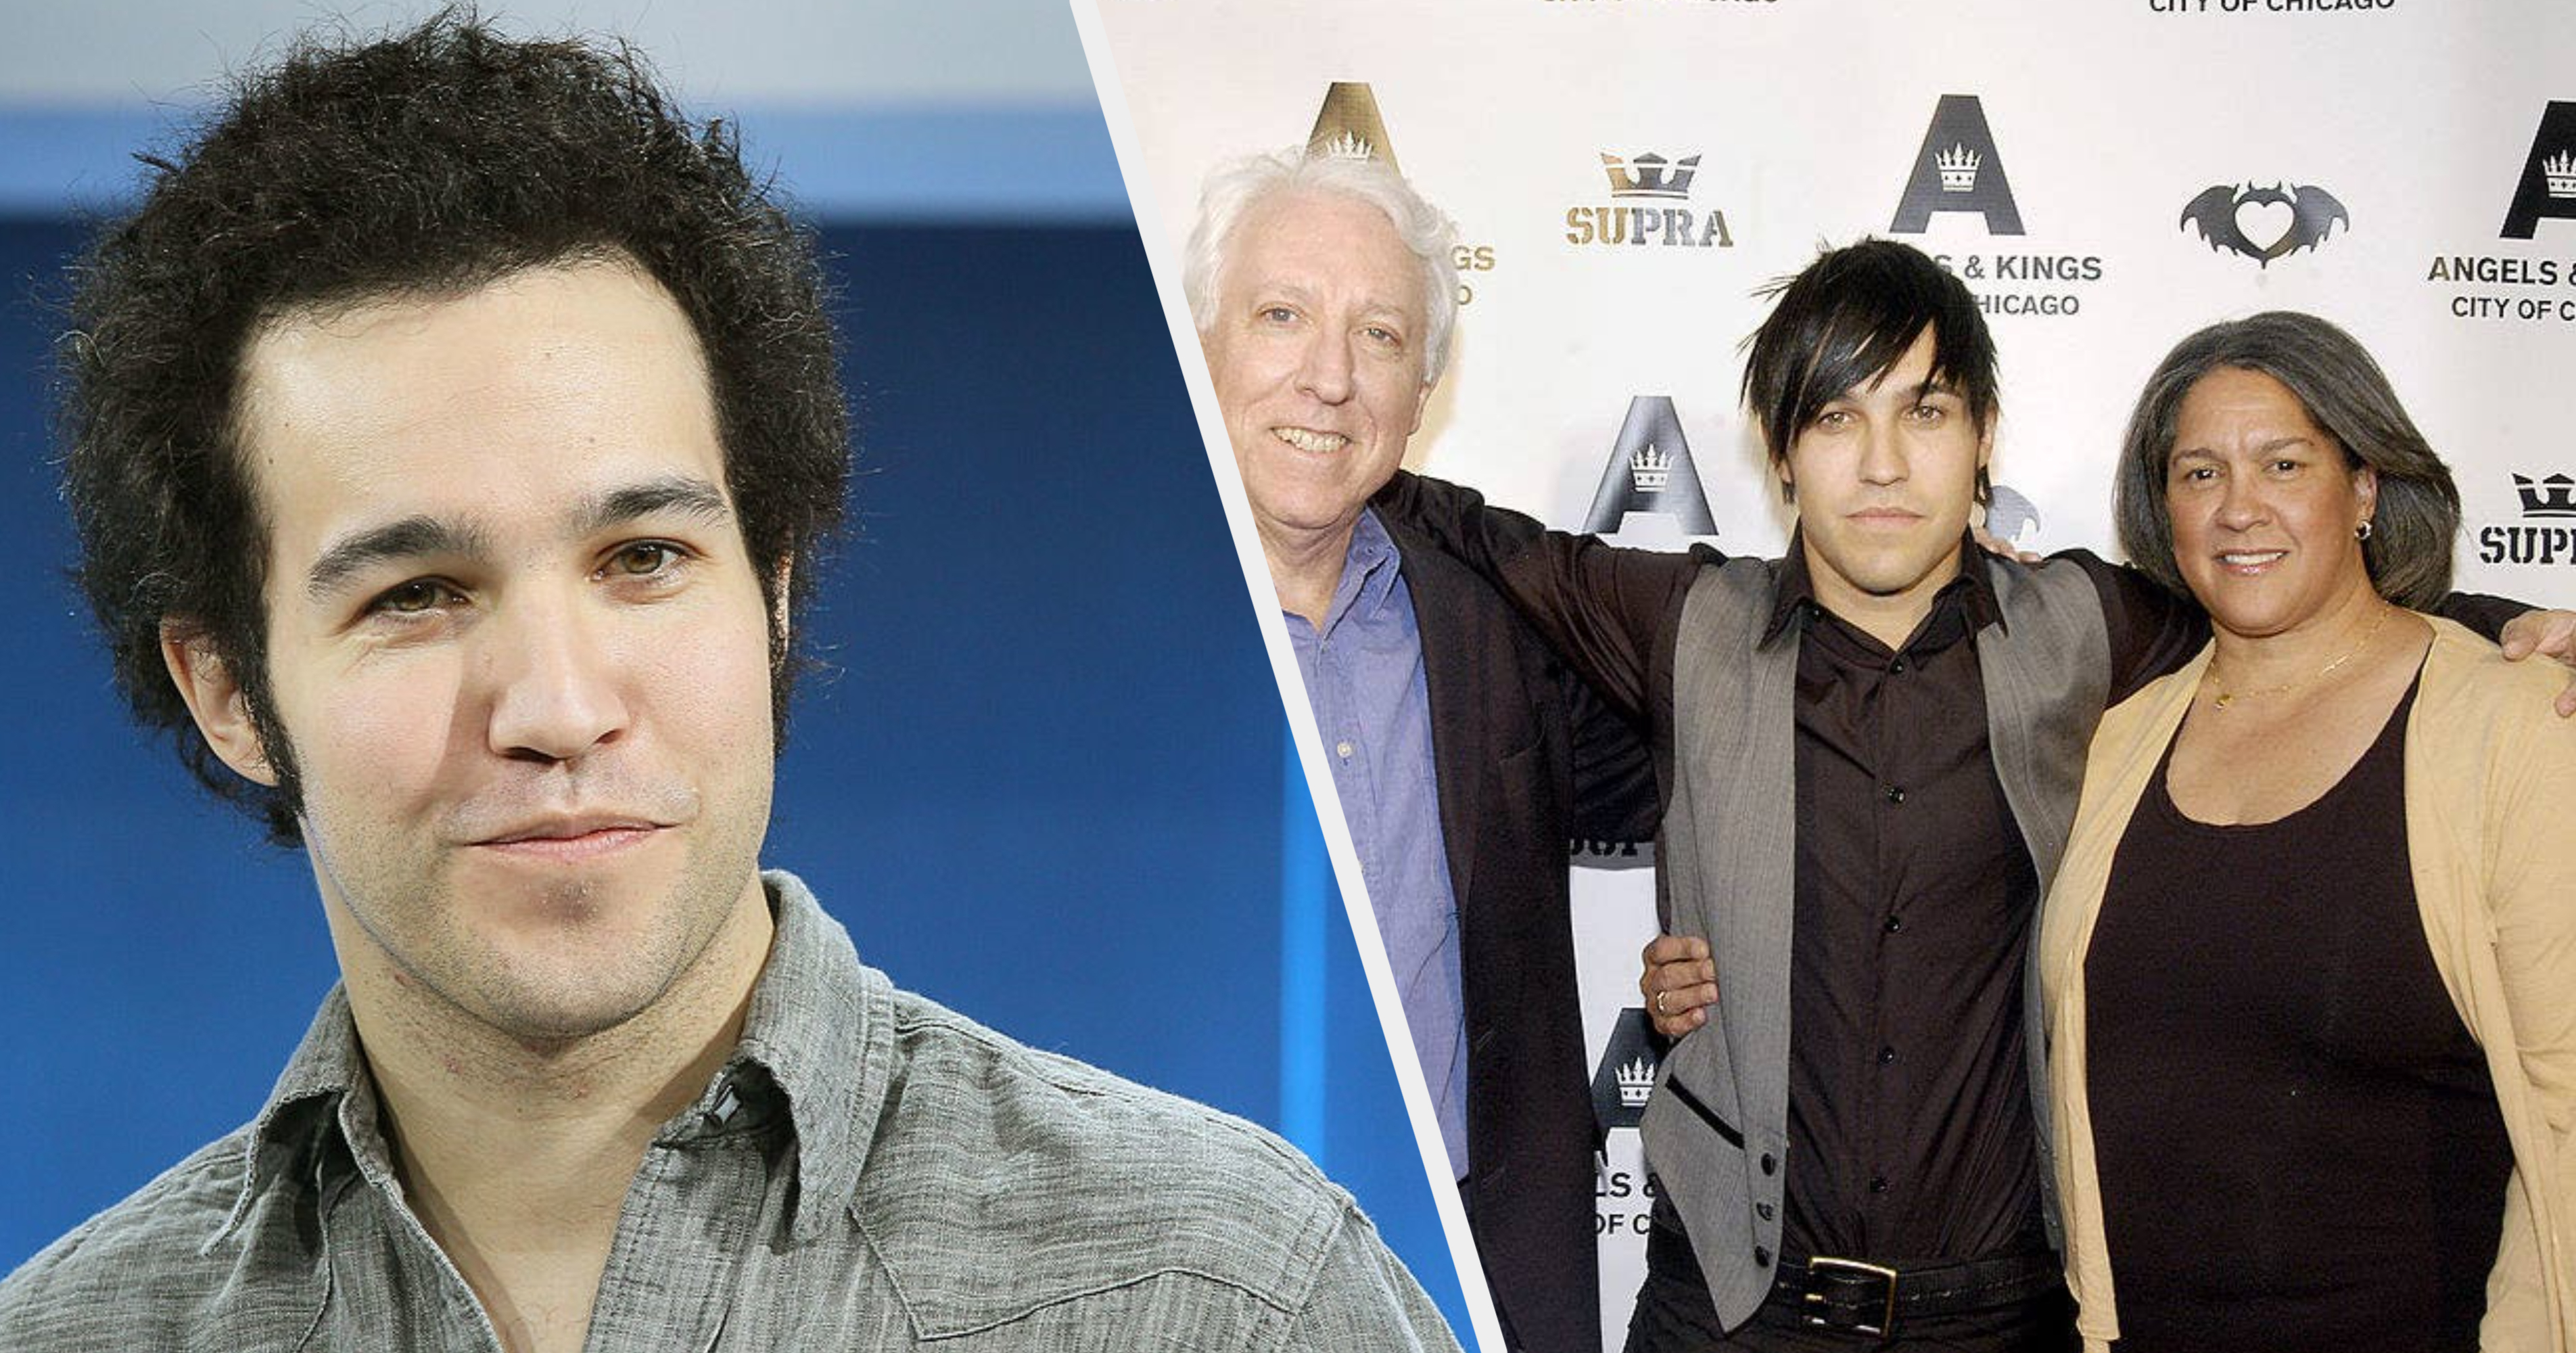 Pete Wentz Is Biracial And Many People Are Just Finding Out About It.